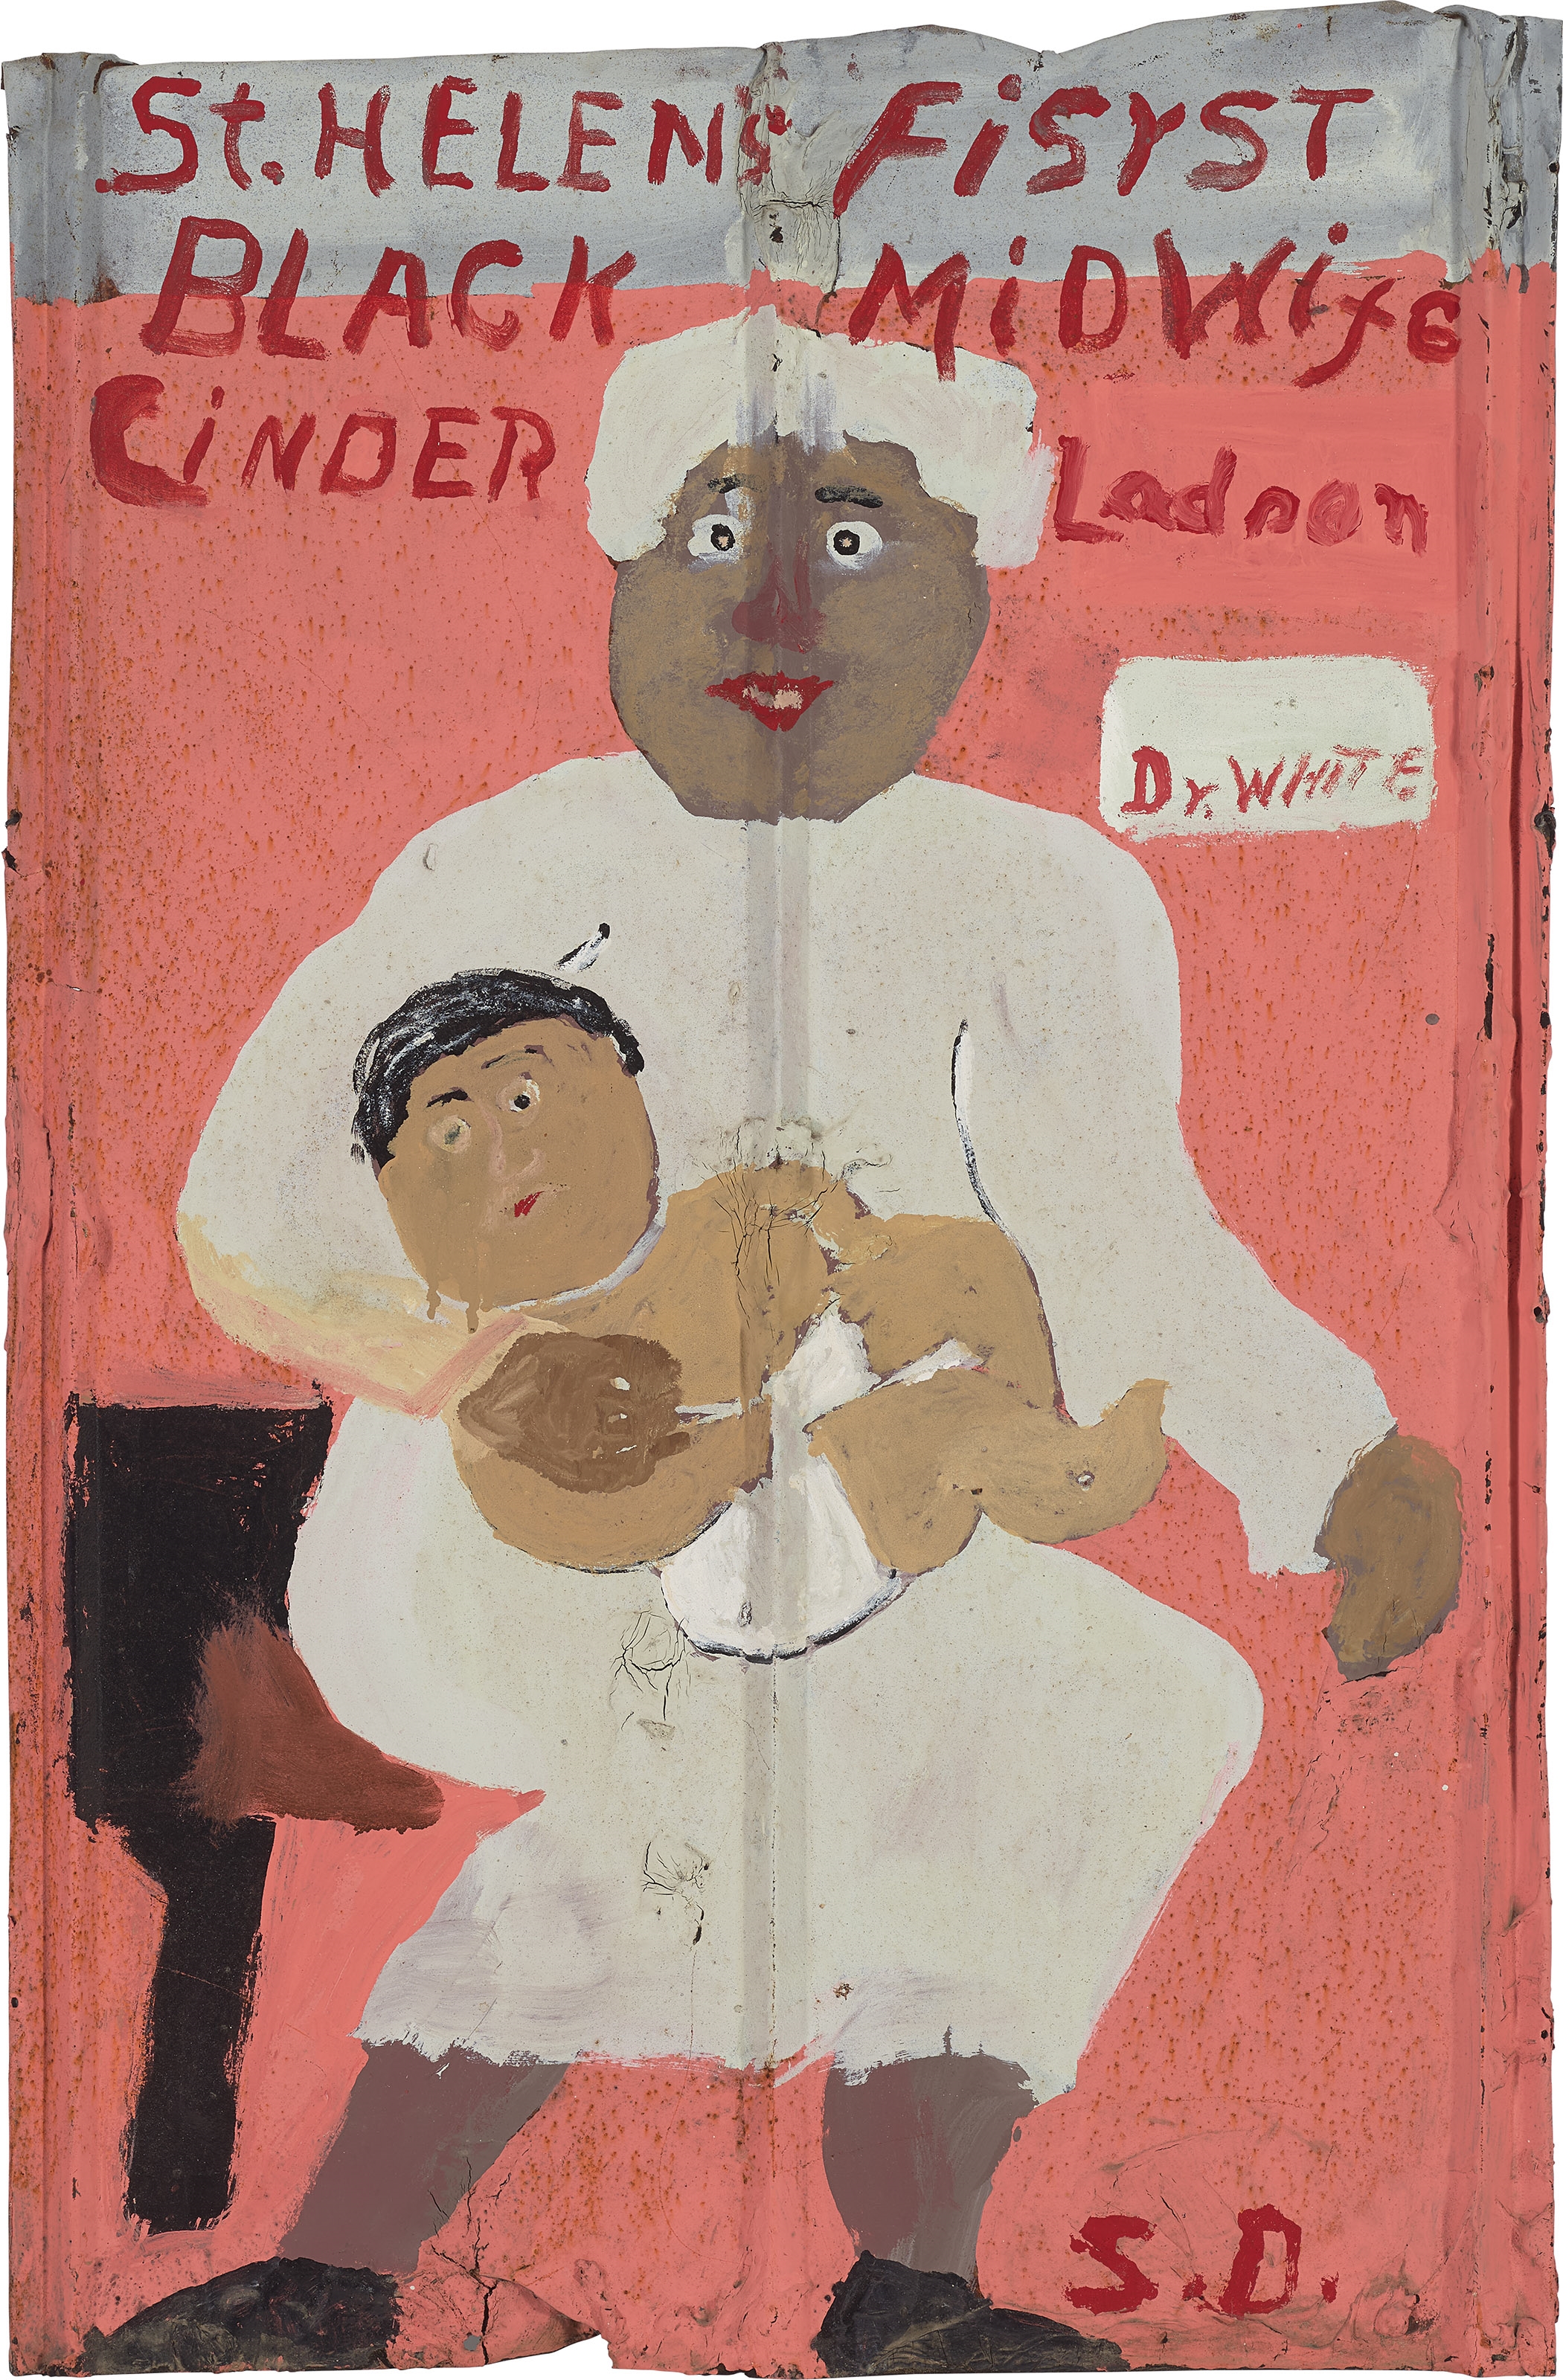 St. Helen's Fisyst Black Midwife Cinder Ladson by Sam Doyle